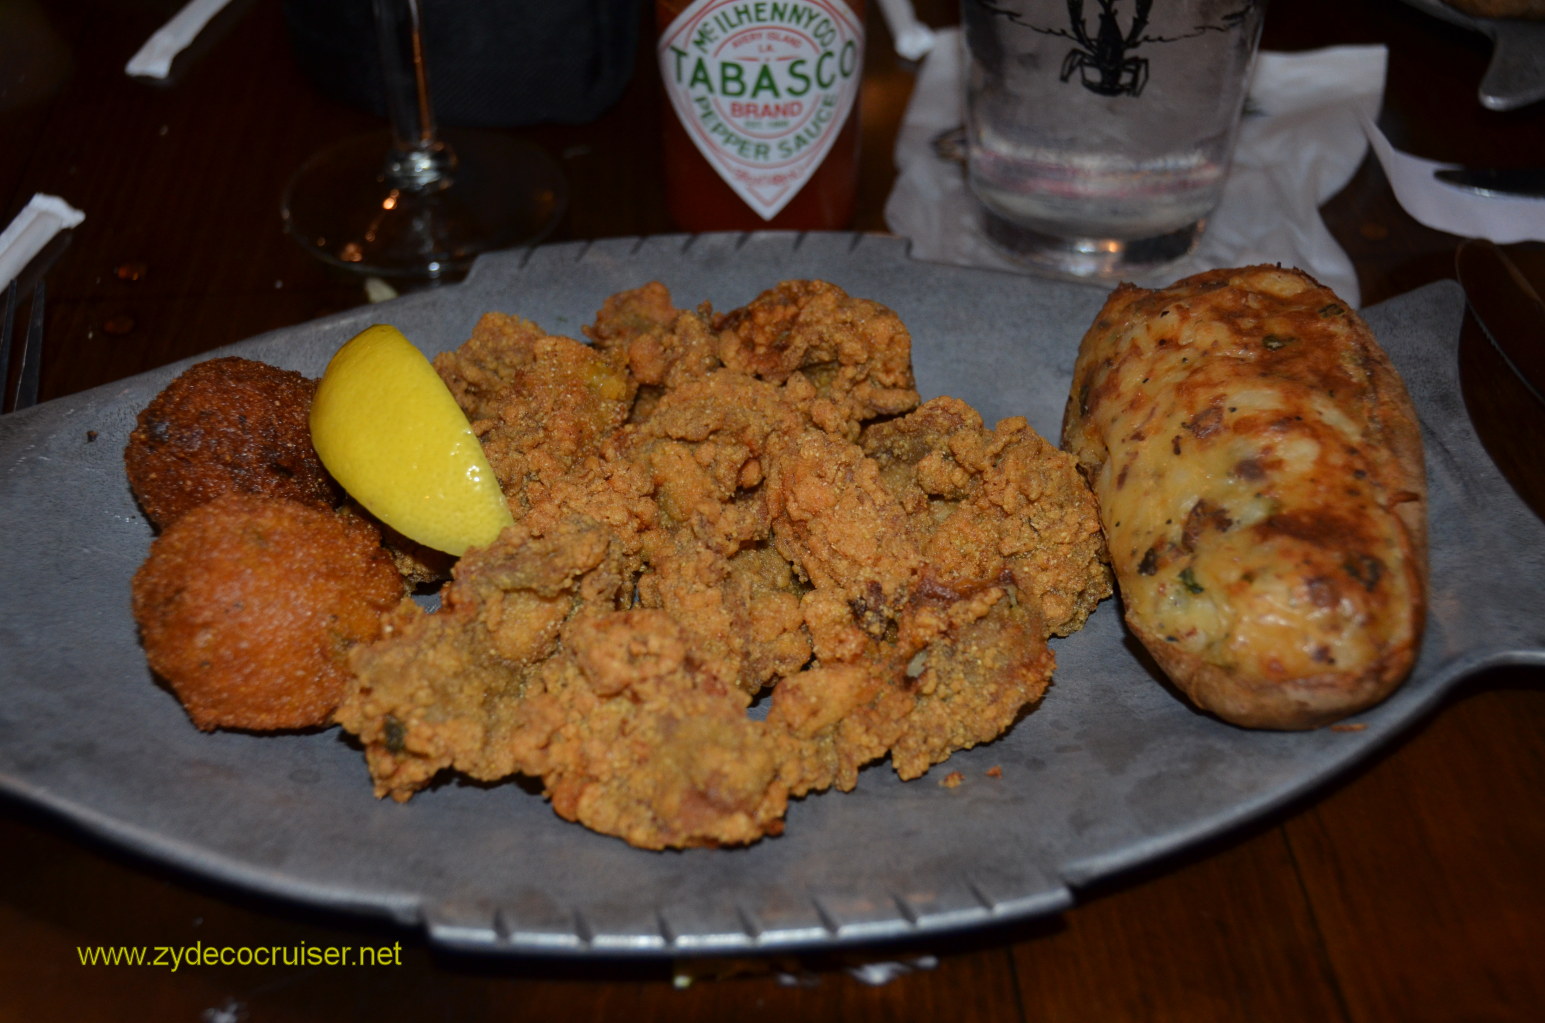 024: Carnival Conquest, Nov 20, 2011, Debarkation Day, Mike Anerdserson's Restaurant, Baton Rouge, LA, Fried Oysters